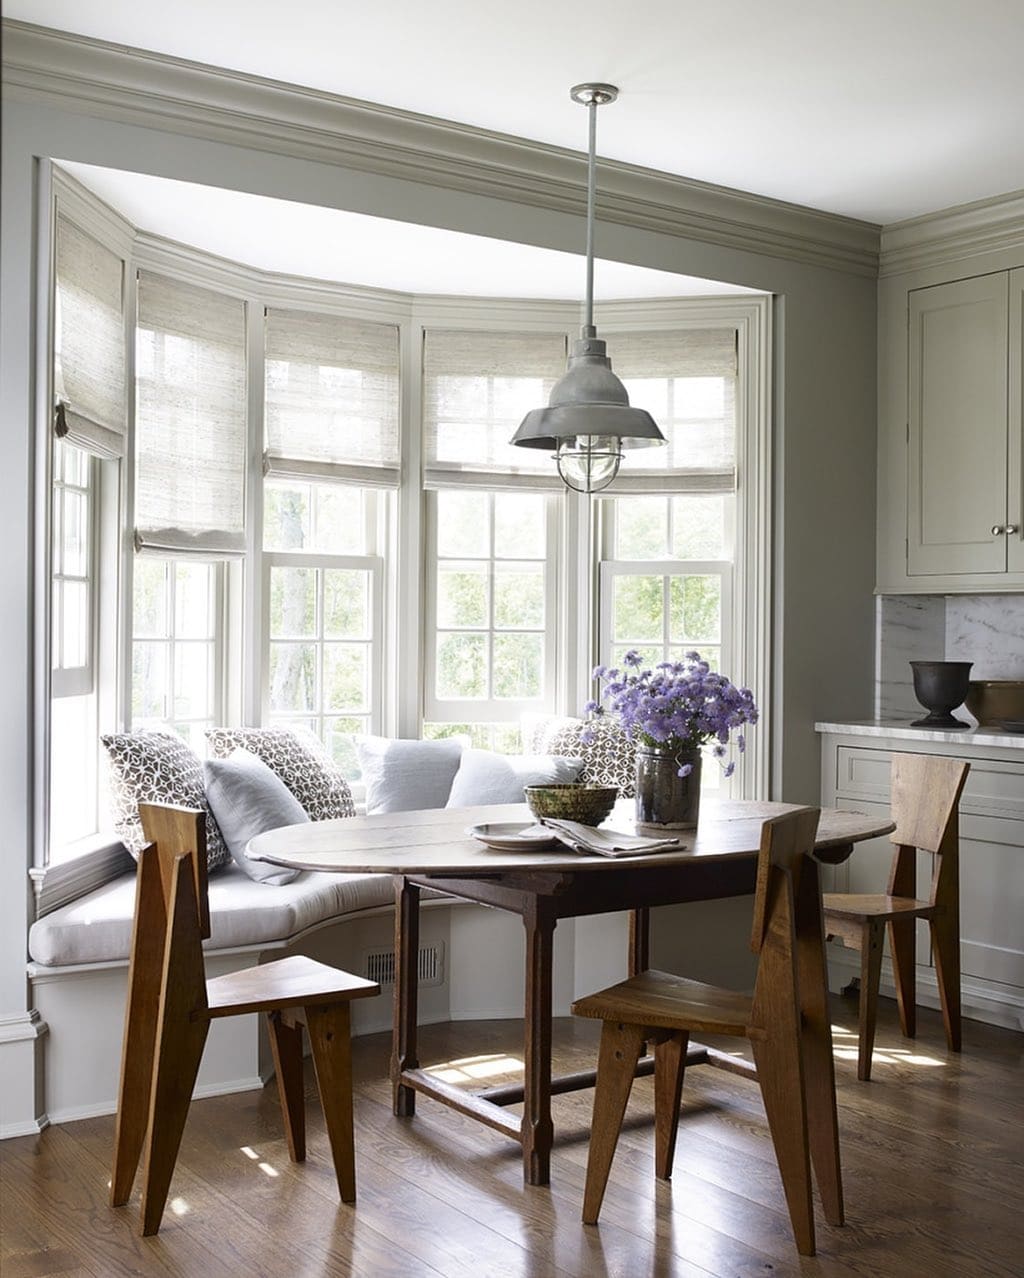 Isn’t this the most inviting breakfast room designed by @markcunninghaminc?! Visit Design Chic, link in profile, to see more favorite spaces from this talented designer!

#designer #design #designinspiration #breakfastroom #diningroom #diningtable #ovaldiningtable #banquette #windowseat #designchic #housebeautiful #traditionalhome